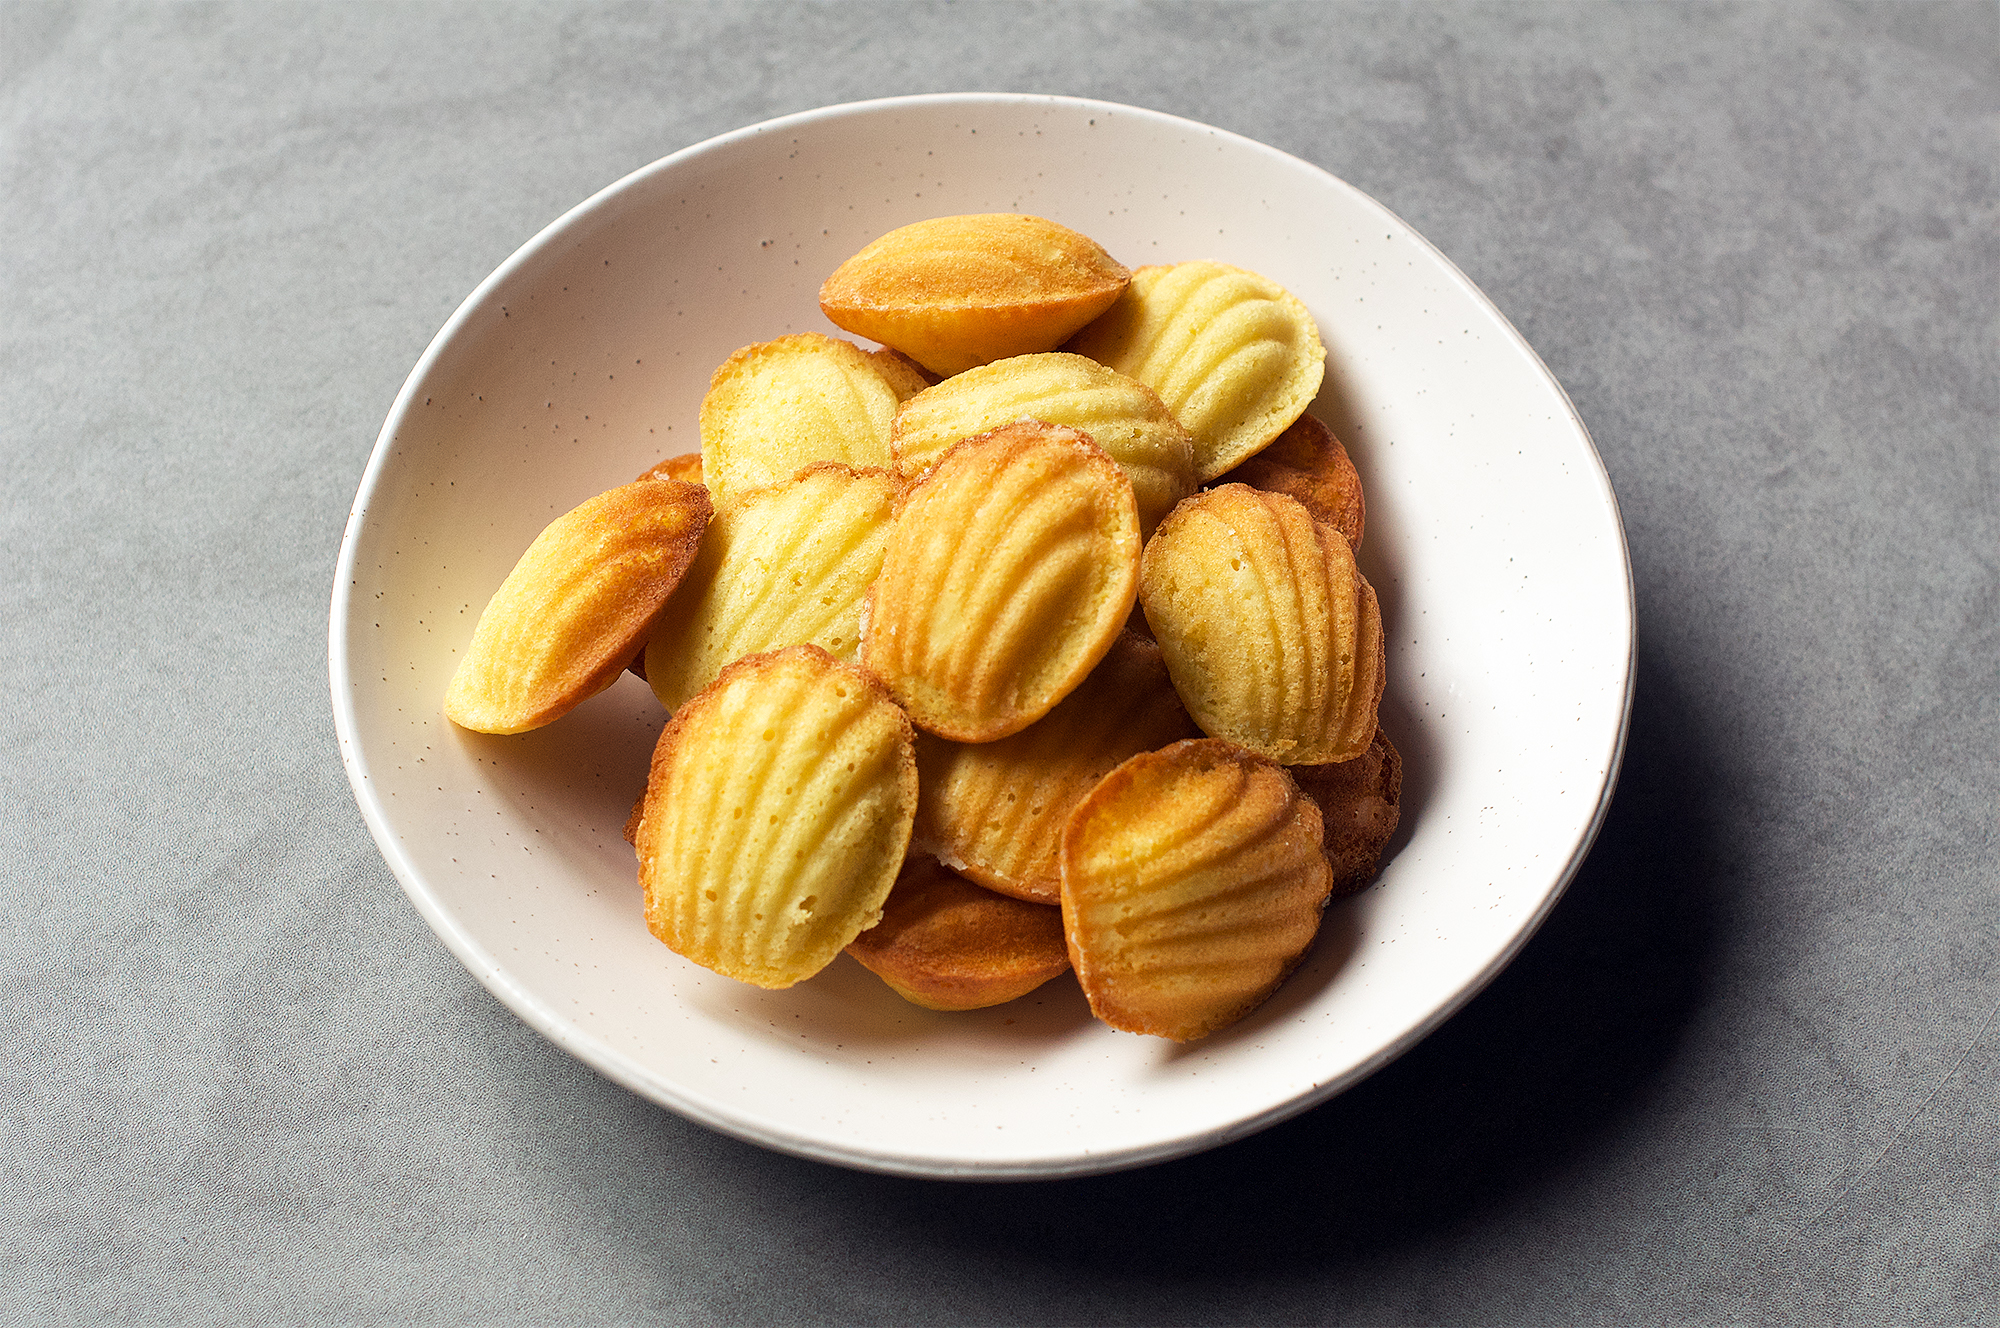 Recipe for homemade French madeleines